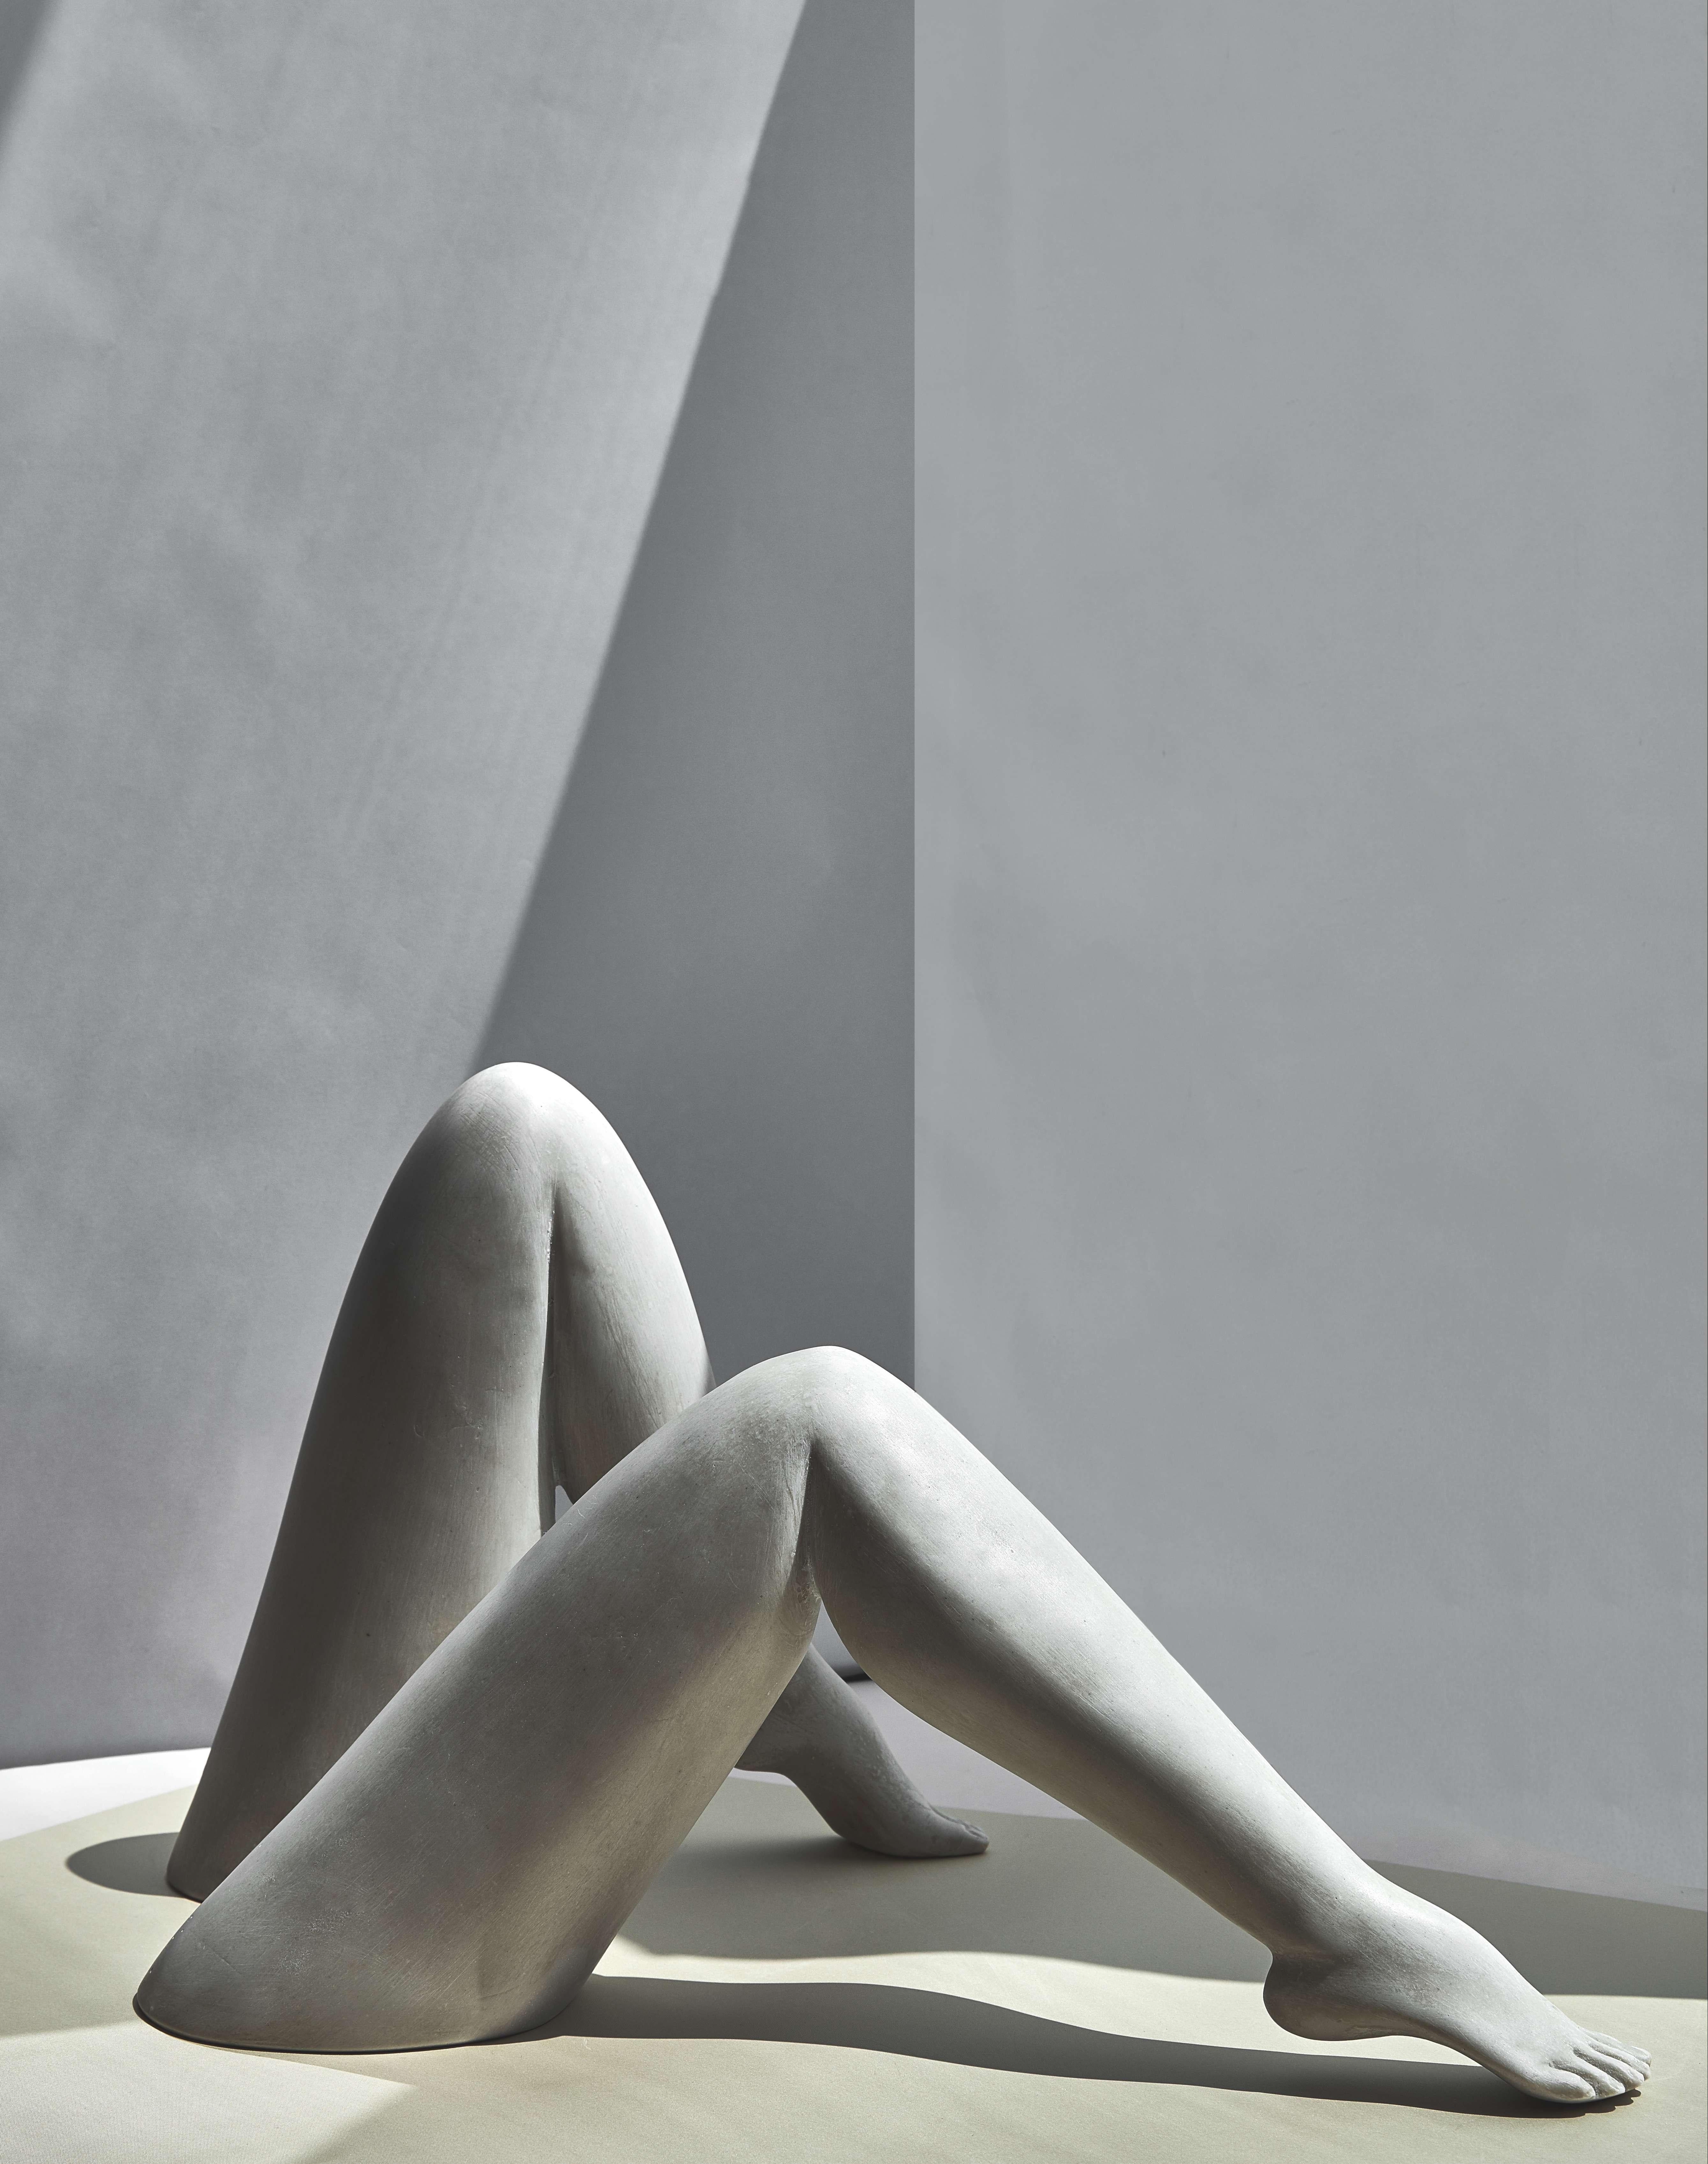 Our Le Gambe sculpture is composed of two individual legs which can be set in different ways creating striking poses.

This collection is inspired by the seducing form of the human body. Pieces that speak for themselves. The pieces in this